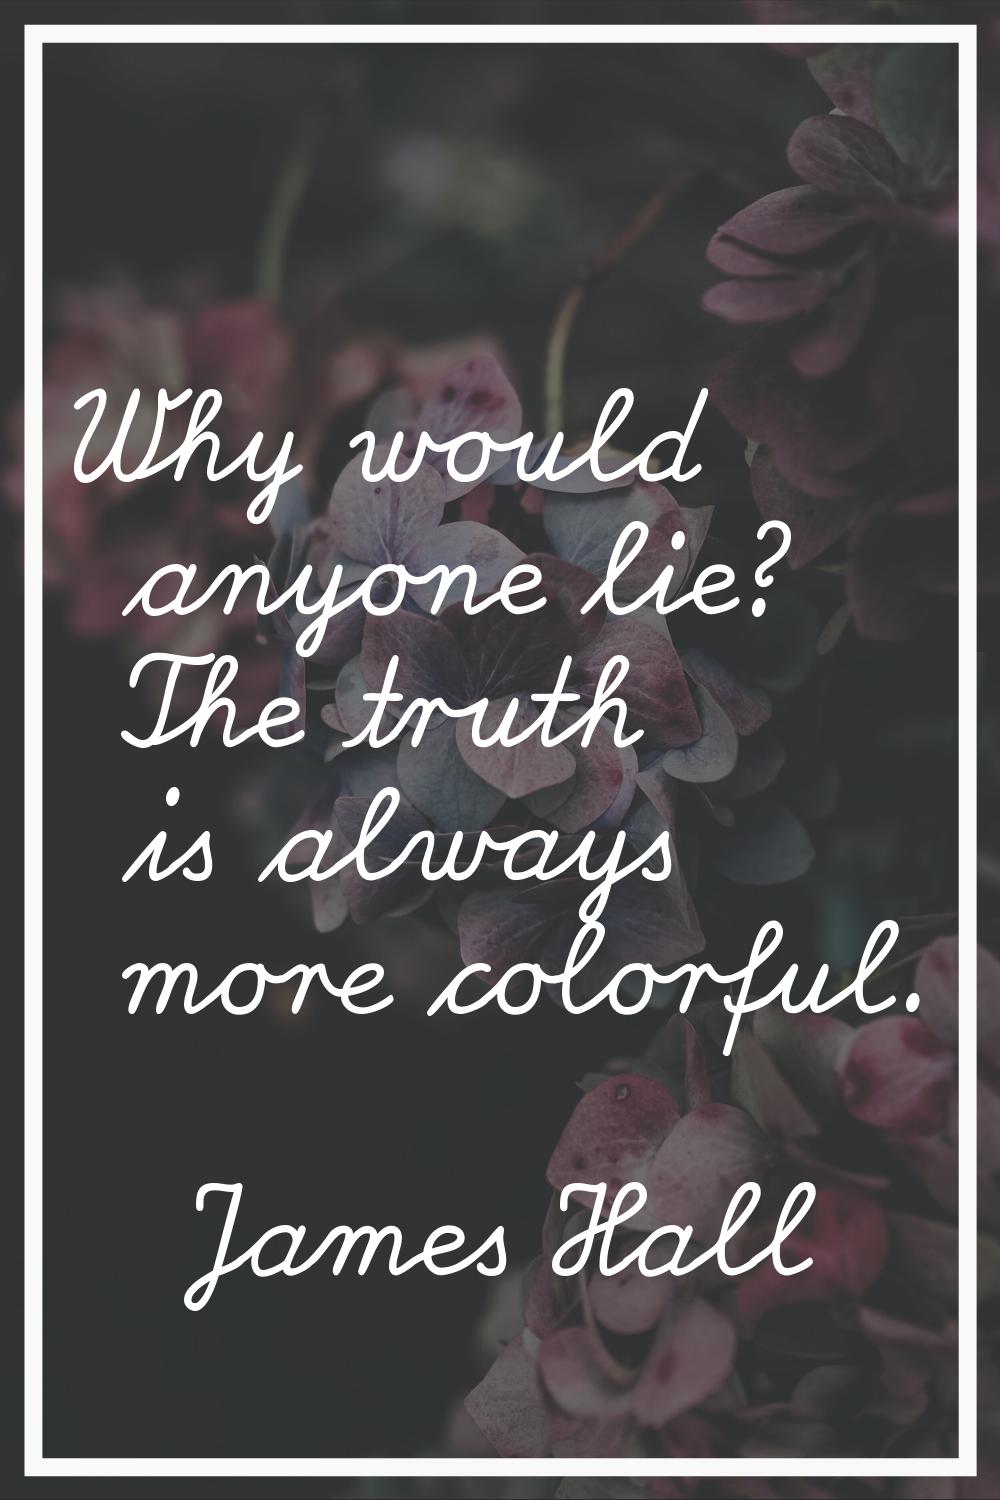 Why would anyone lie? The truth is always more colorful.